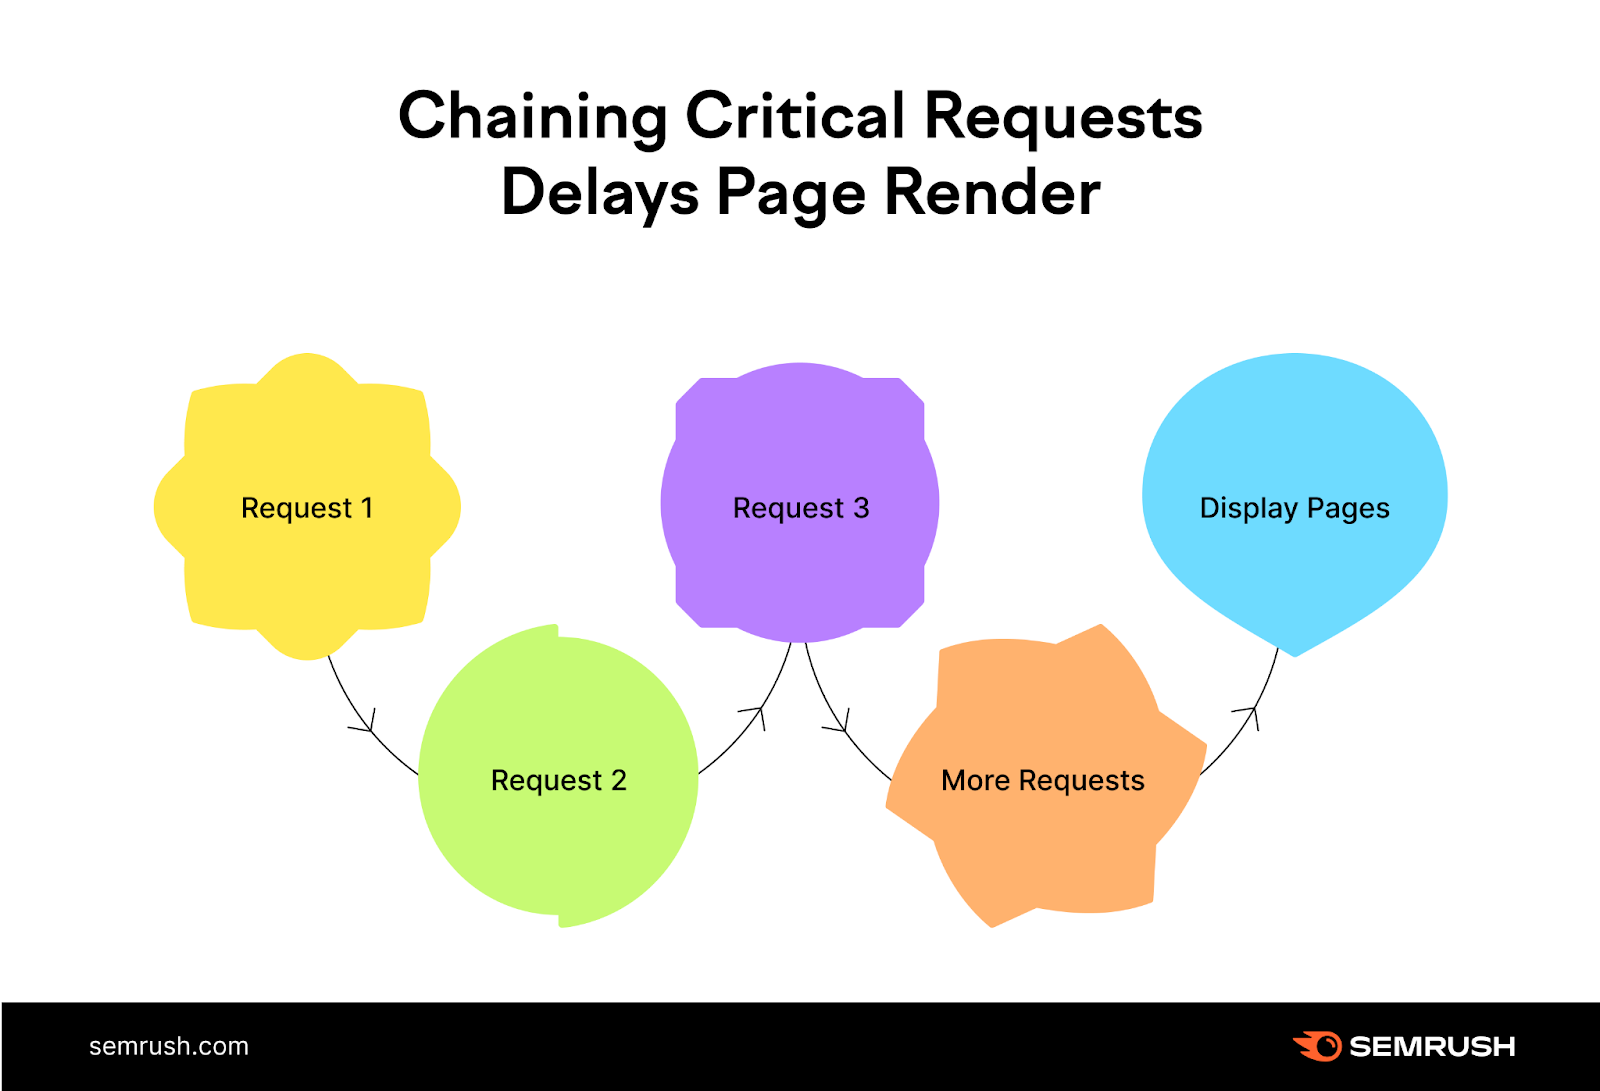 "Chaining Critical Requests Delays Page Render" infographic